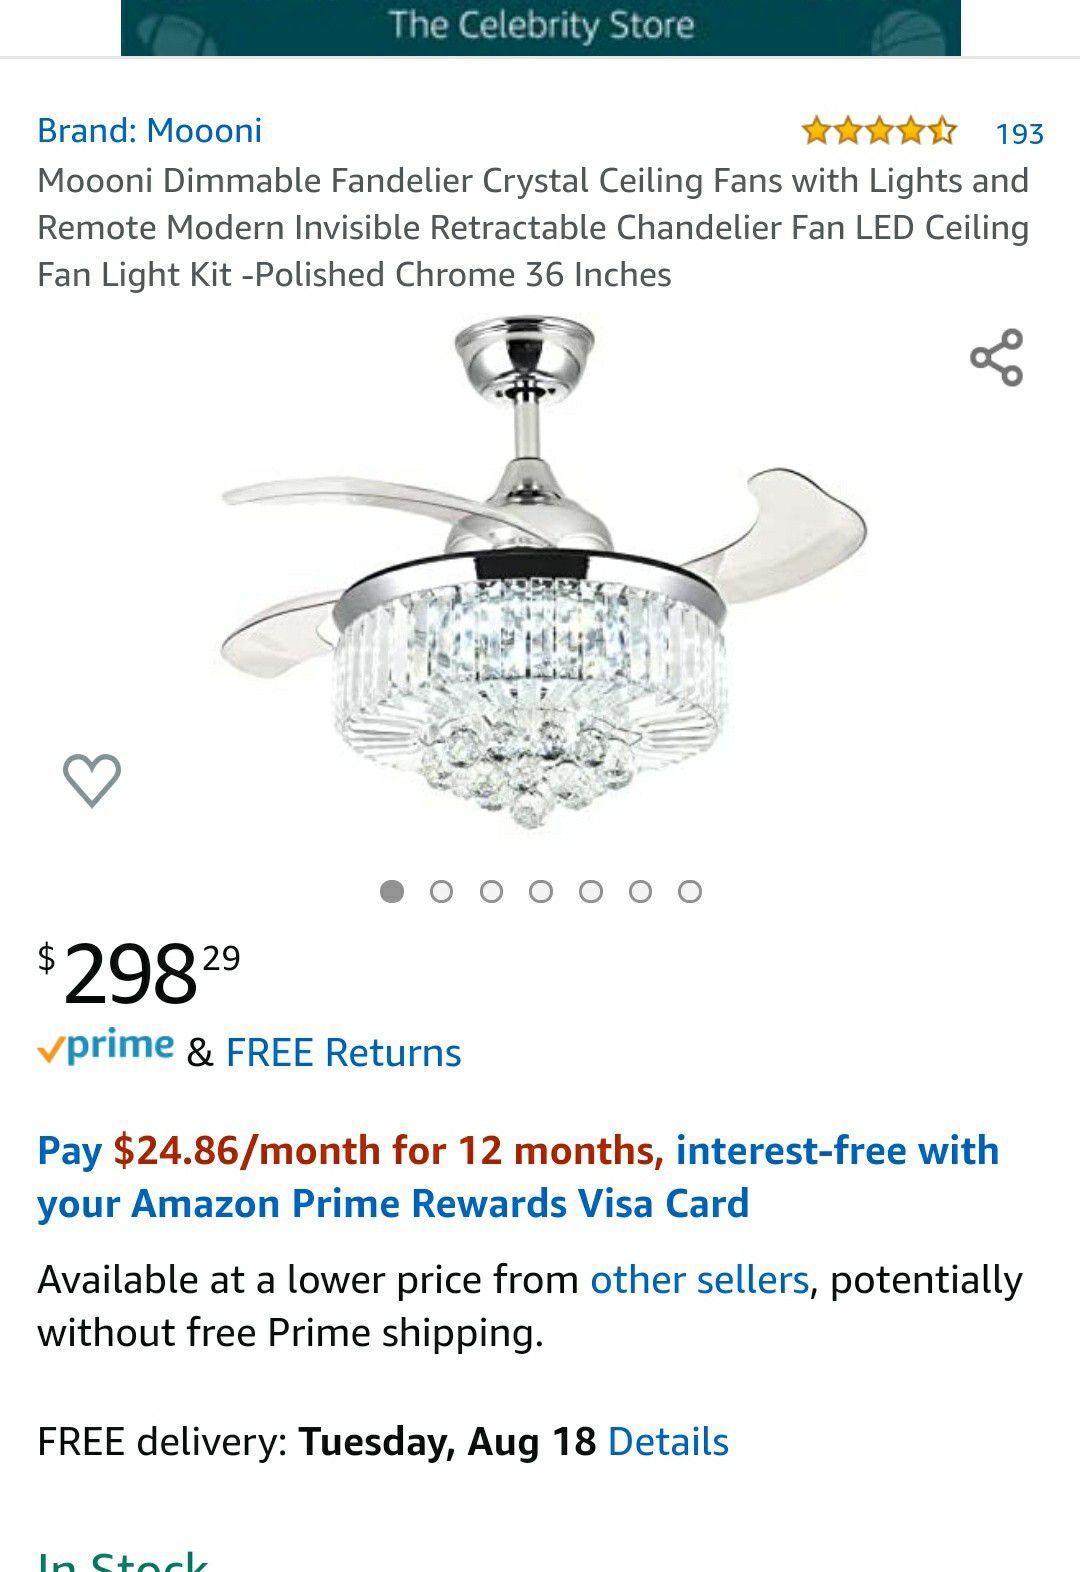 Crystal Ceiling Fans with Lights and Remote Modern Invisible Retractable Chandelier Fan LED Ceiling Fan Light Kit -Polished Chrome 36 Inches